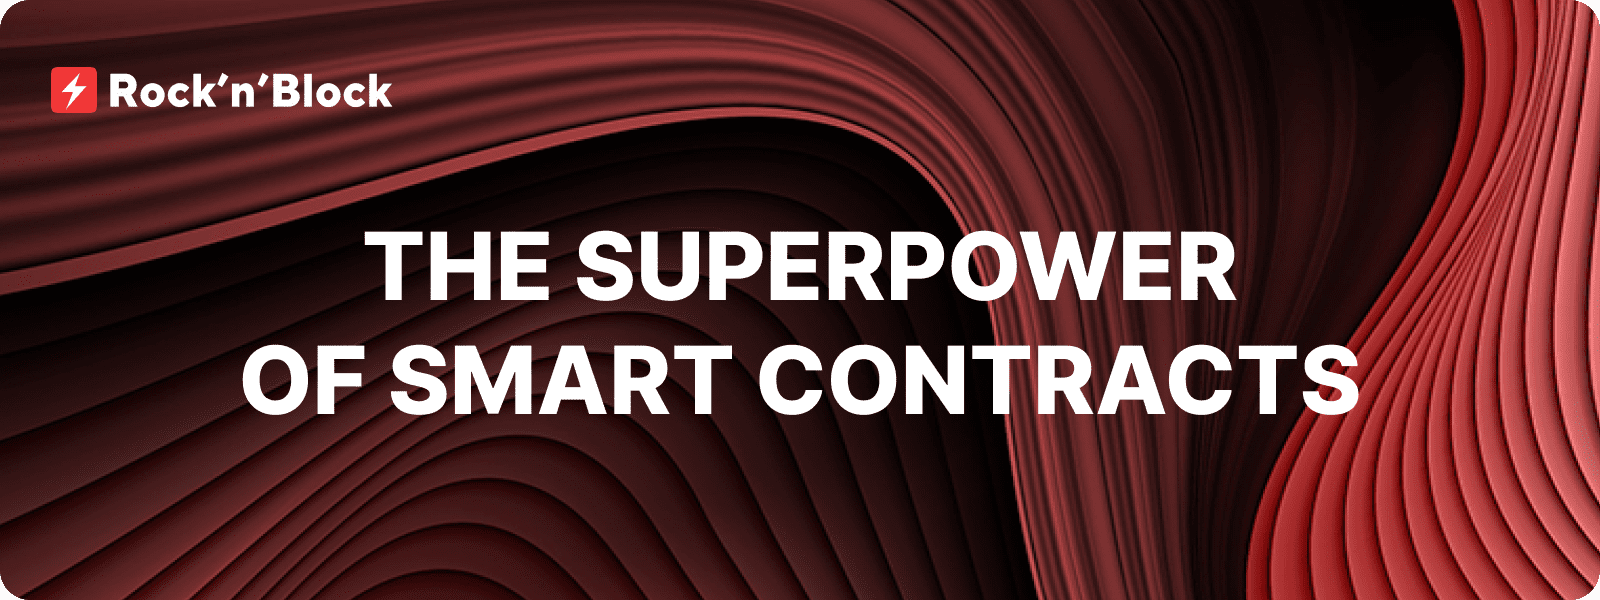 The Superpower of Smart Contracts